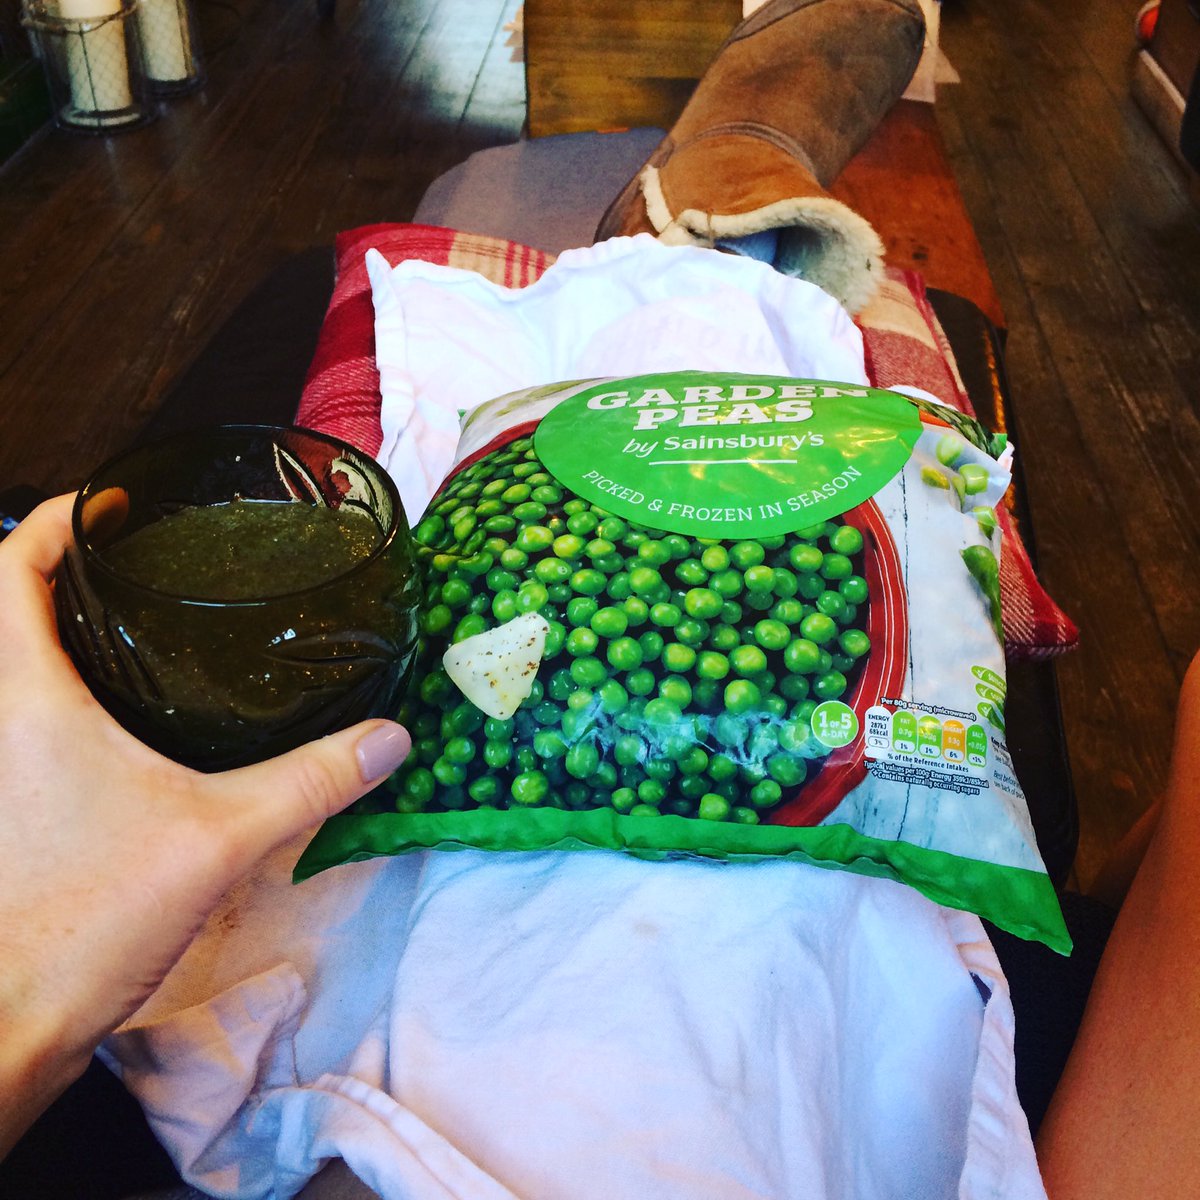 My best friends at the moment. #gardenpeas #recoverydrink